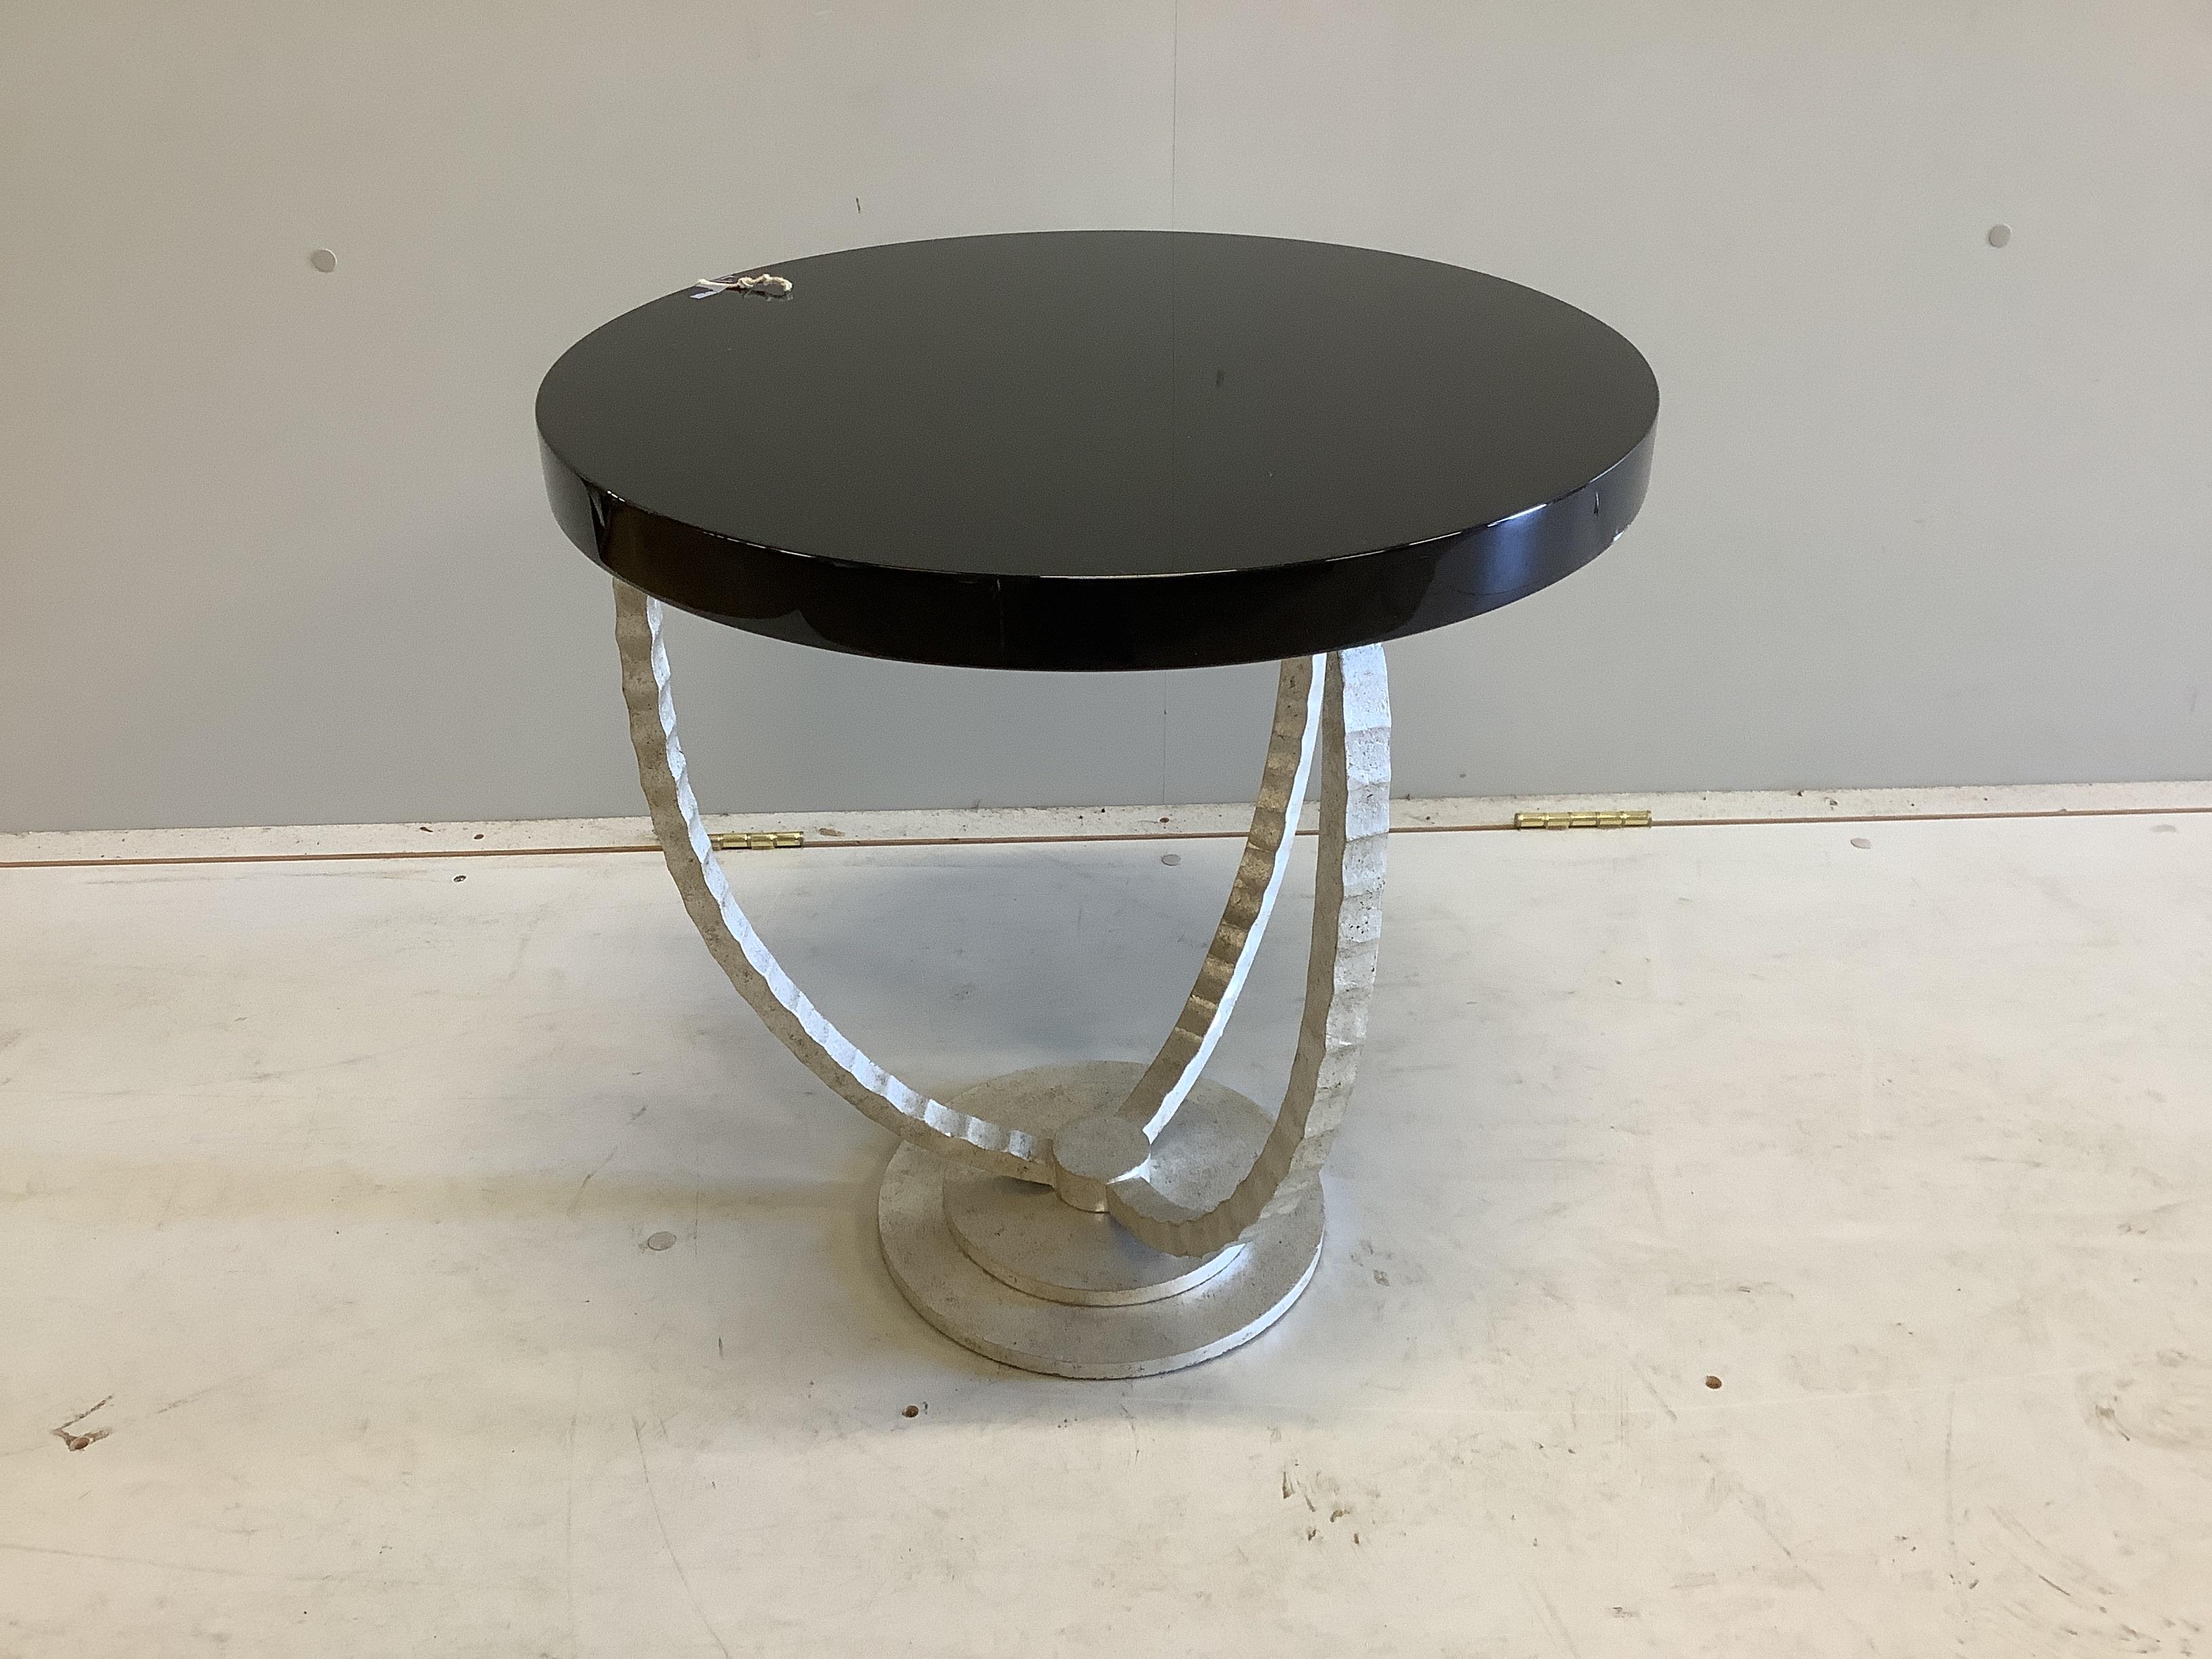 A Porta Romana Trident chestnut gloss/decayed silver side table, diameter 52cm, height 53cm